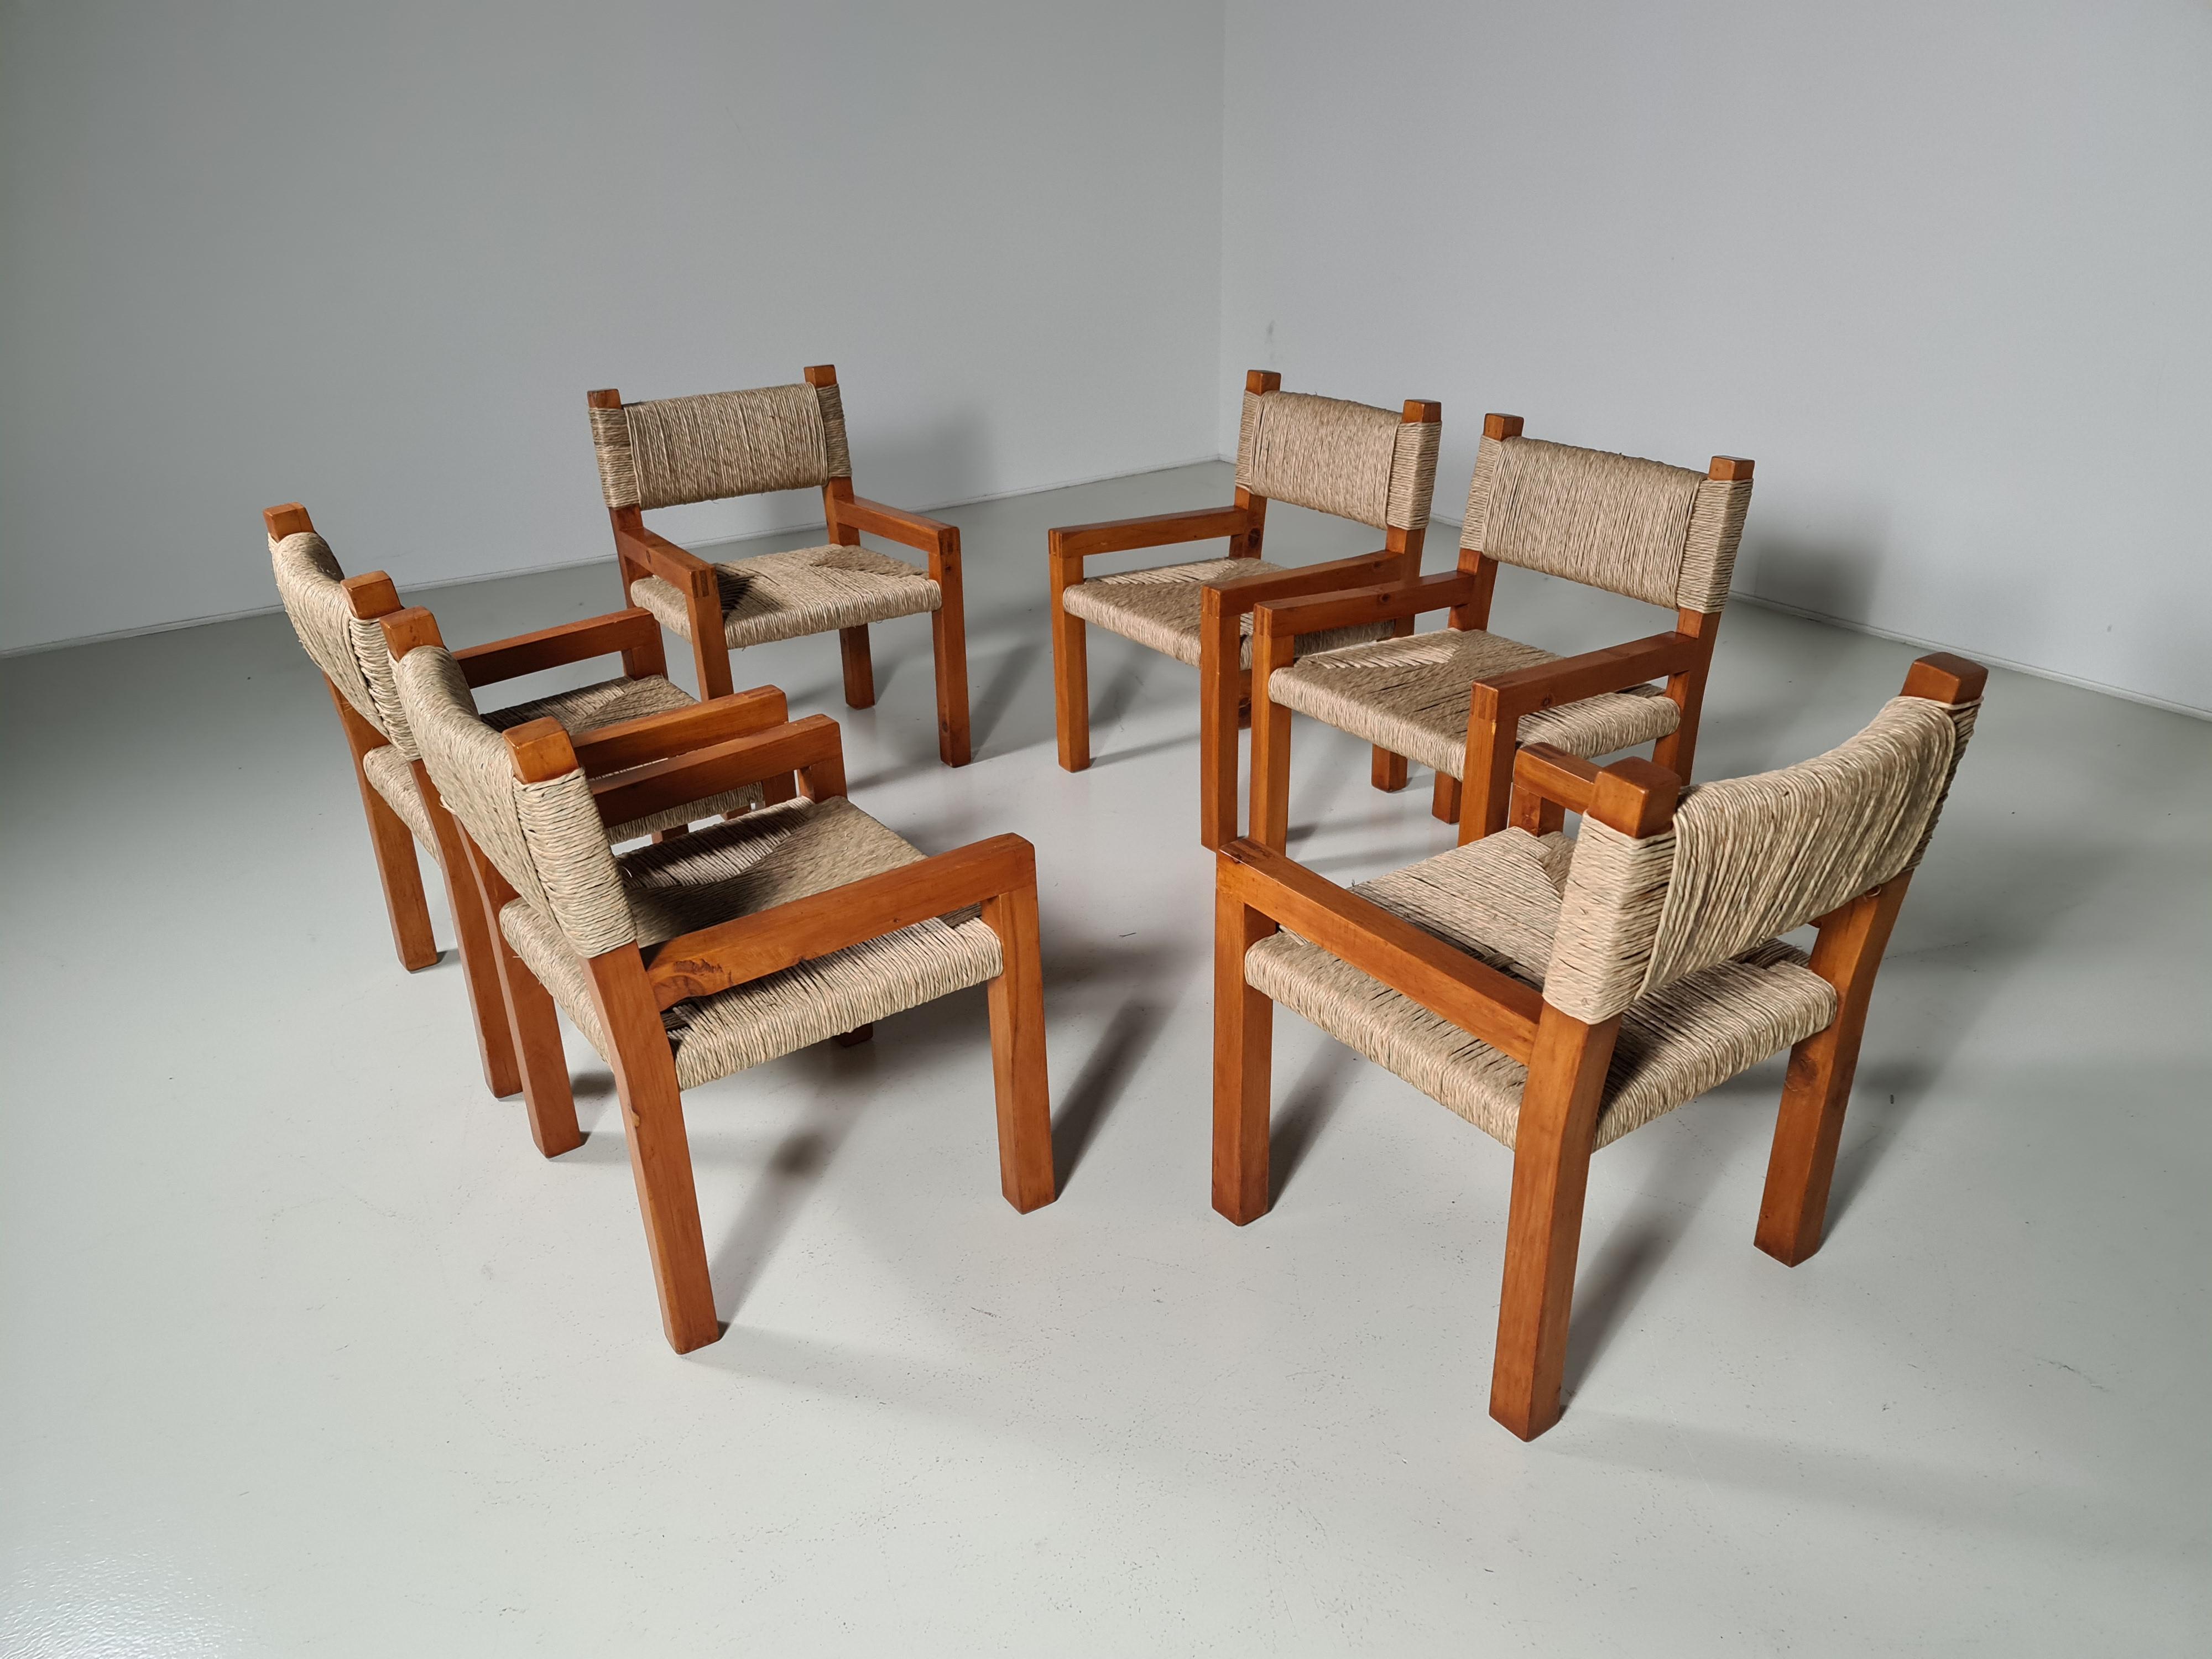 Rare set of brutralist style pine dining chairs with woven paper cord seats. The elegant designed open shape of the frame in combination with the natural colored seats makes this chair very versatile for any type of interior. The design looks